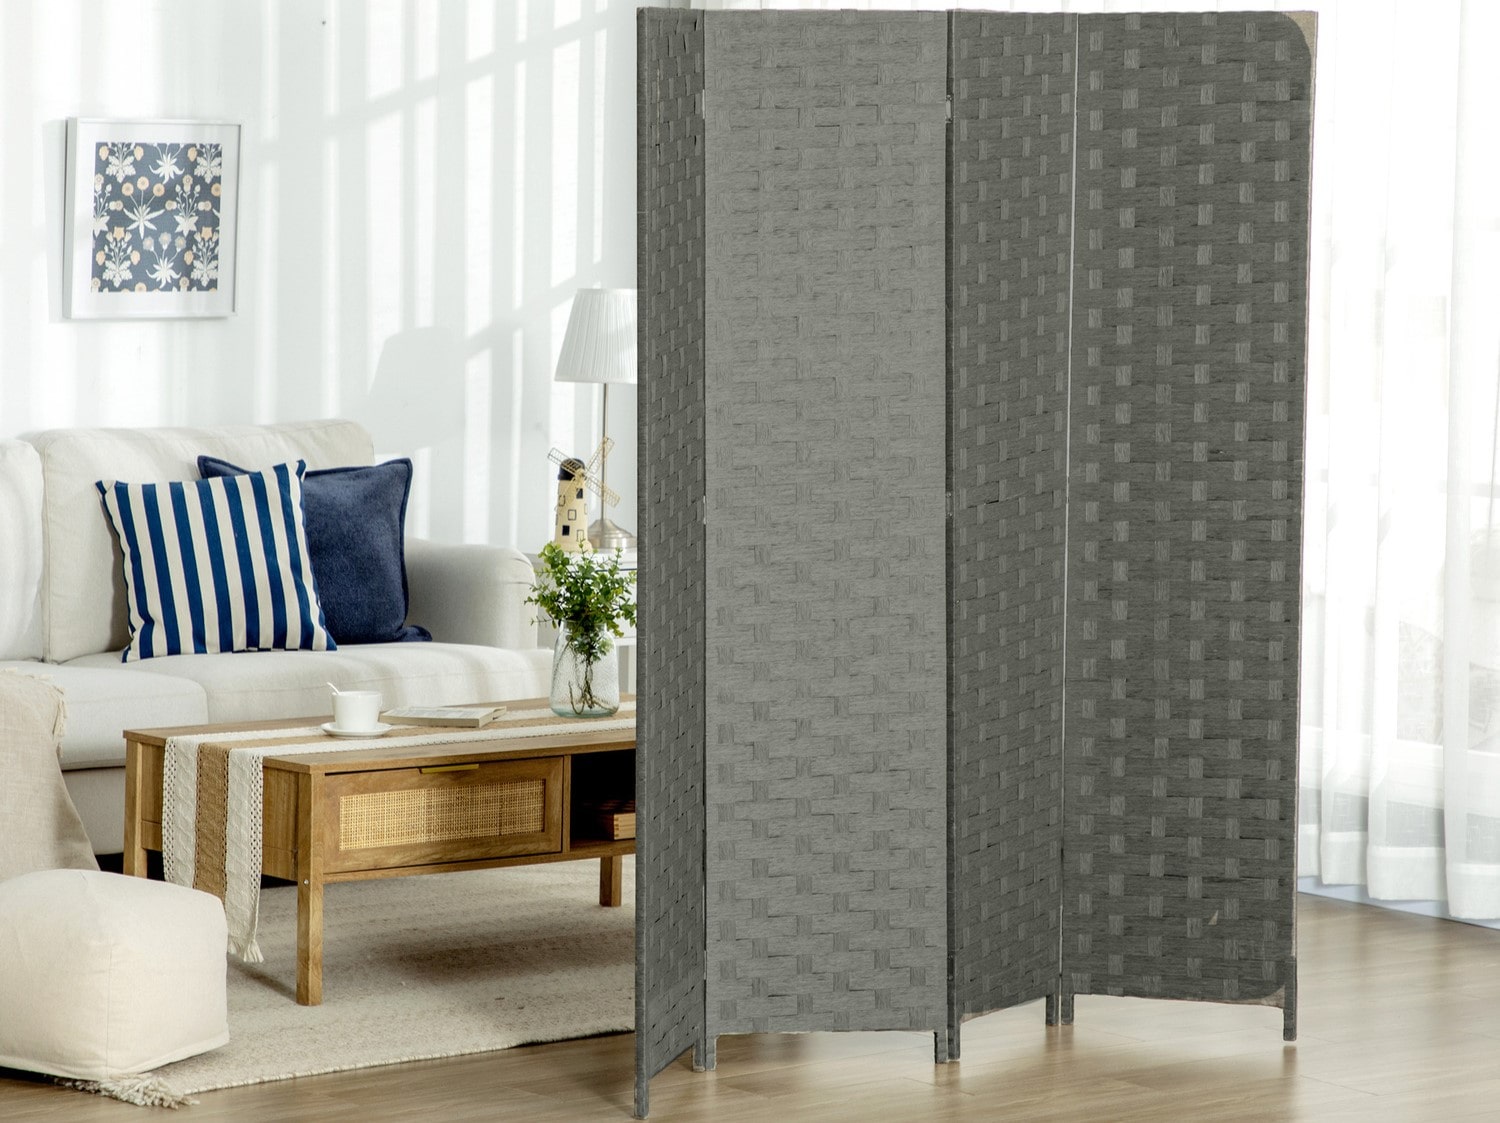 How To Make A Folding Screen Room Divider